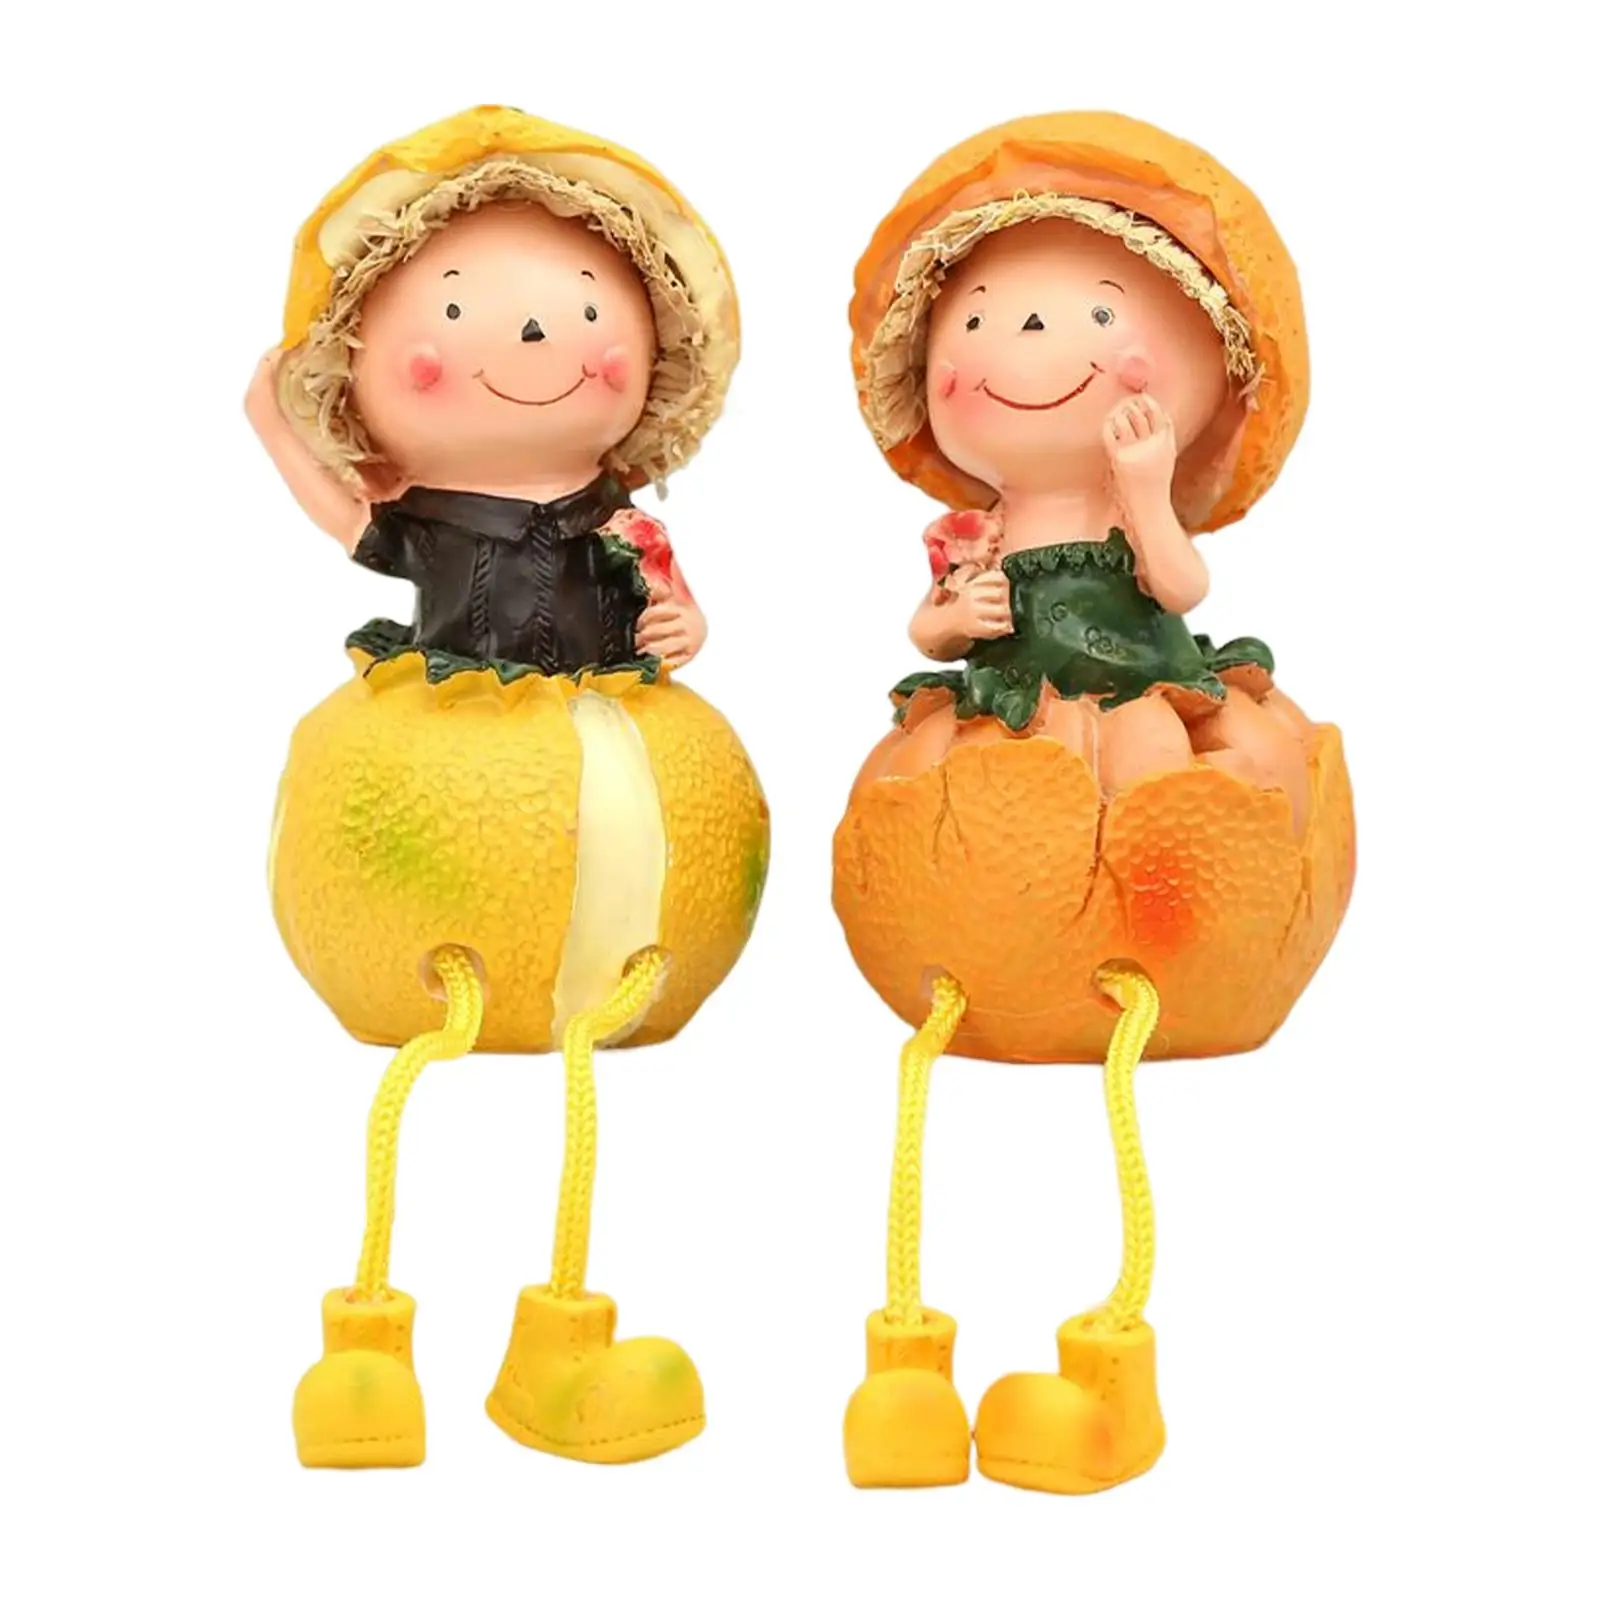 2x Hanging Feet Doll Resin Statue Sculpture Figurine Crafts for Counter Top